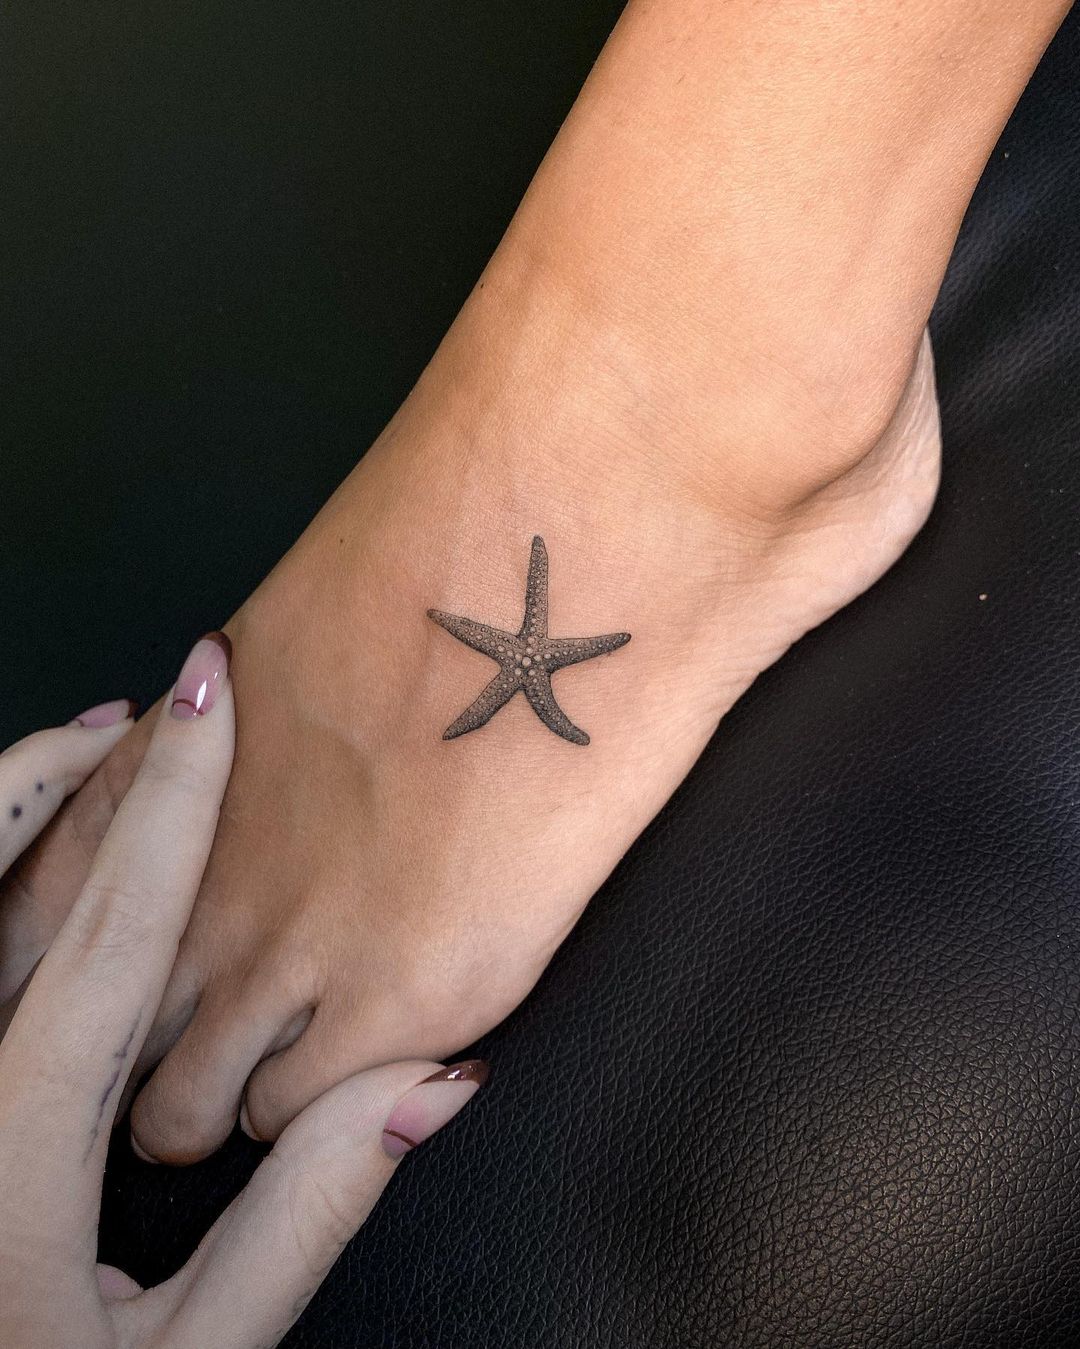 40 Dazzling Starfish Tattoos Designs Meanings And Best Placements  Starfish  tattoo Tattoos Sleeve tattoos